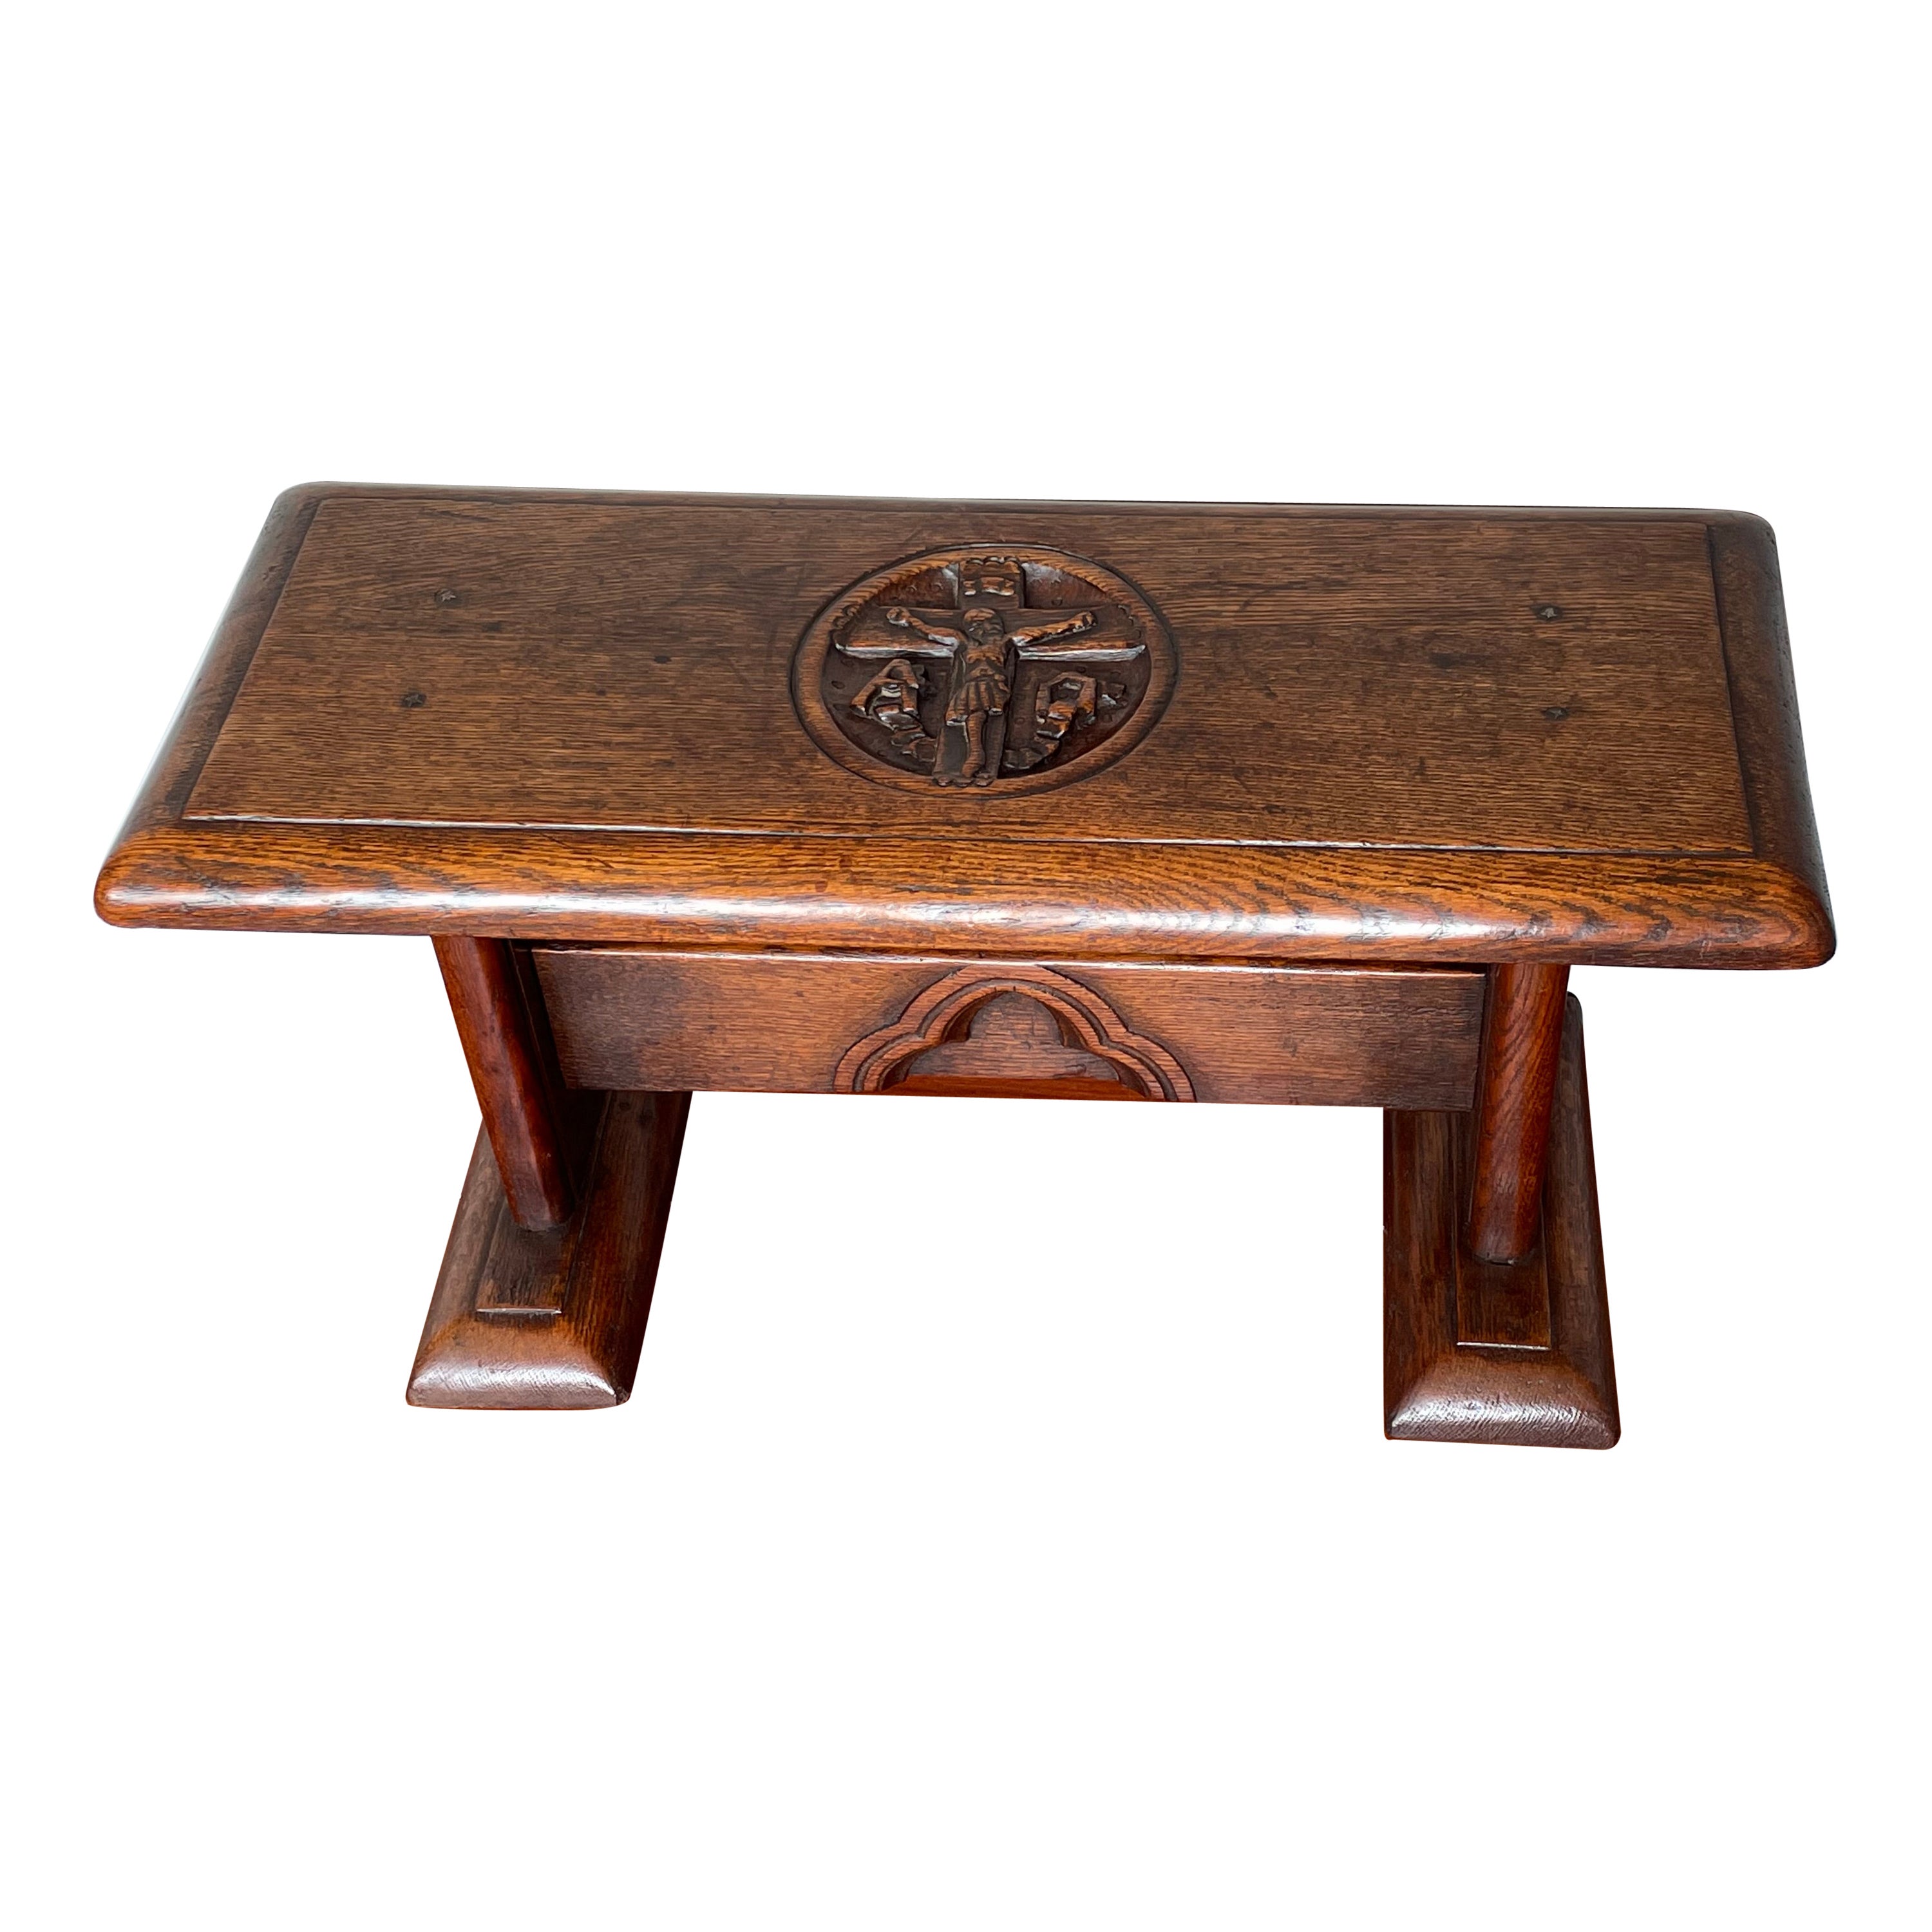 Gothic Revival Stool / Bench with Hand Carved Christ on Crucifix Sculpture 1800s For Sale